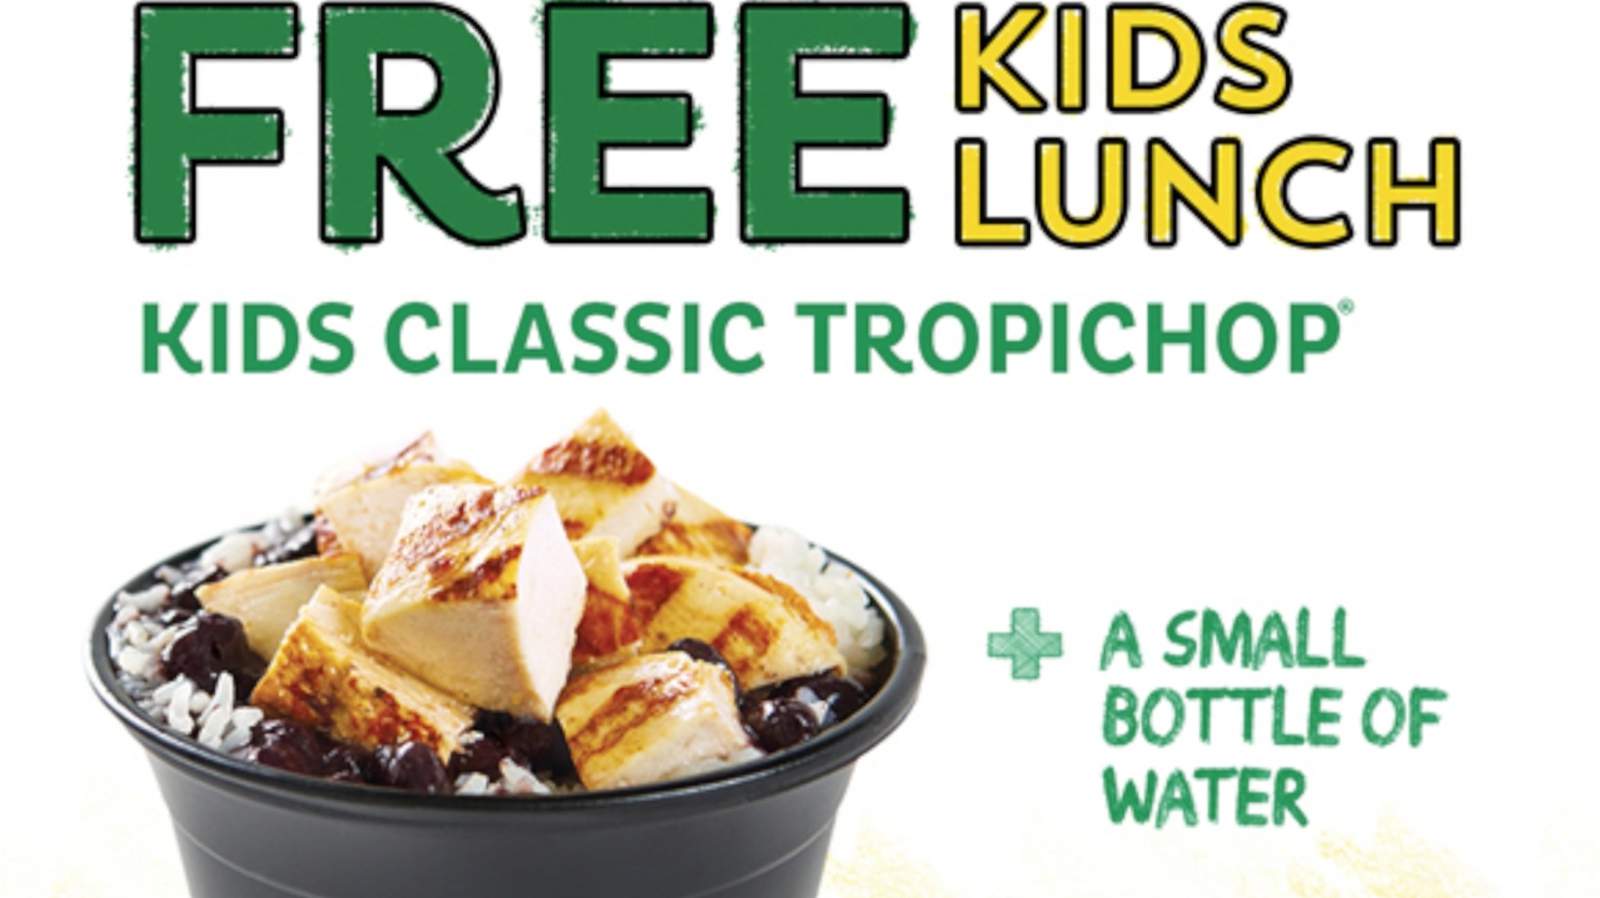 Pollo Tropical extends free kids lunch through end of summer